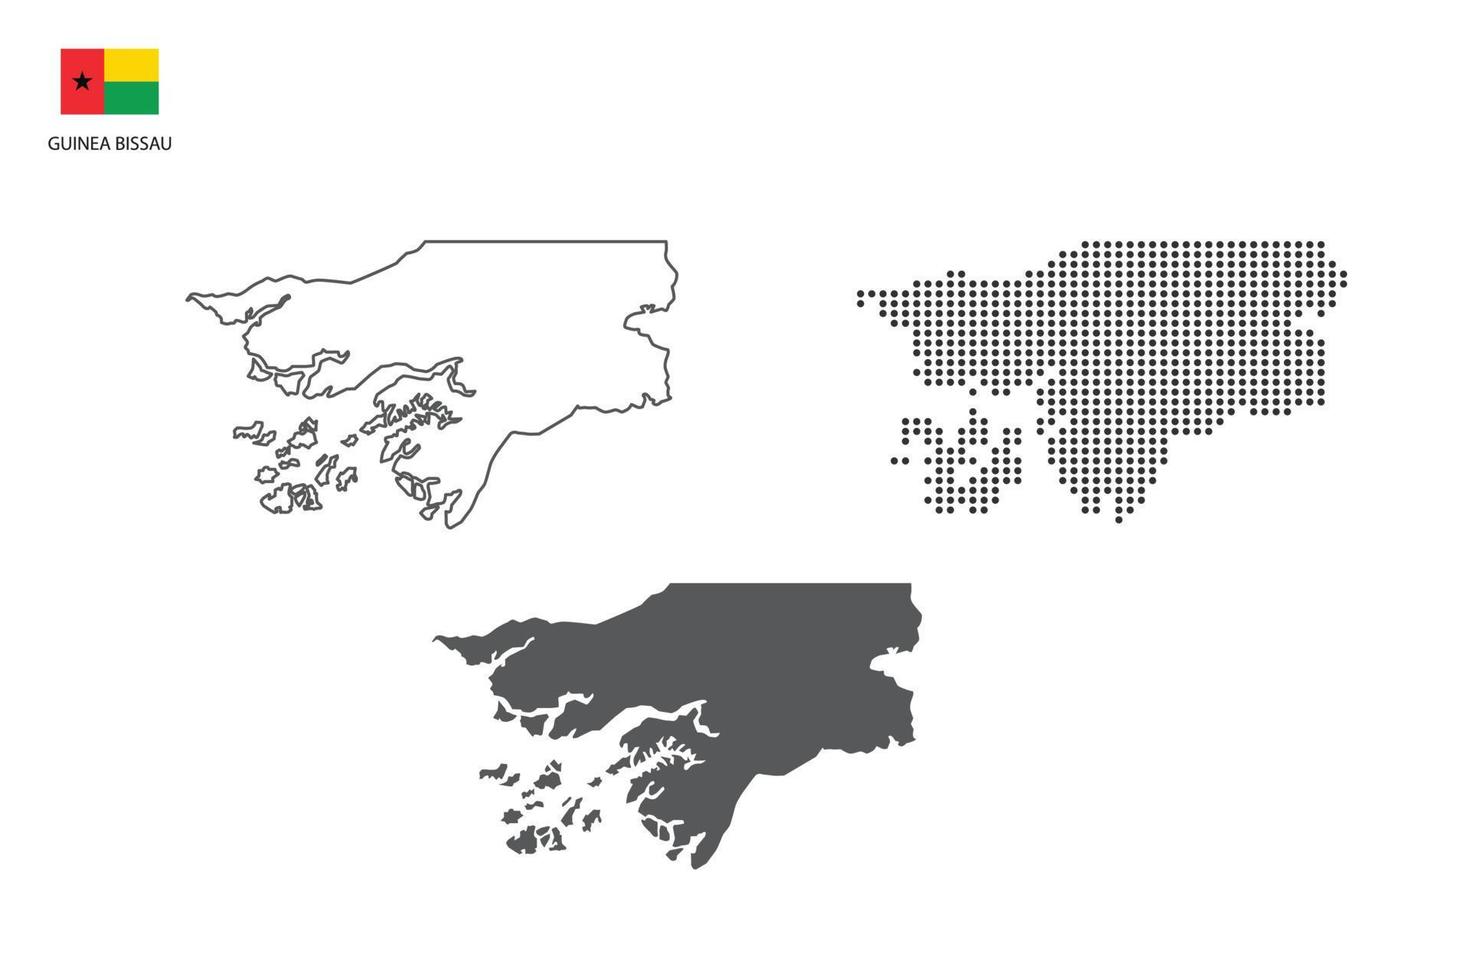 3 versions of Guinea Bissau map city vector by thin black outline simplicity style, Black dot style and Dark shadow style. All in the white background.